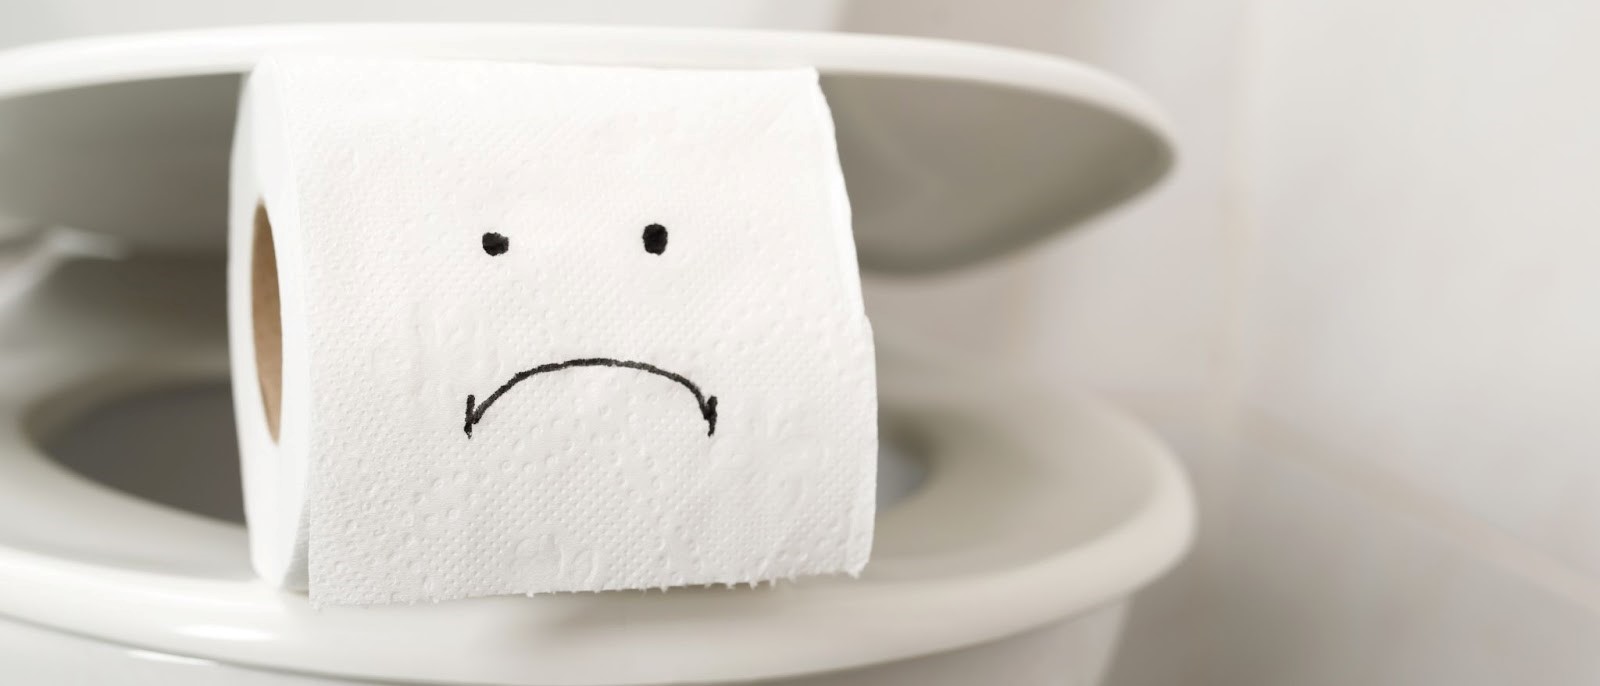 Roll of toilet paper with a sad face drawn on, between the lid and seat of toilet